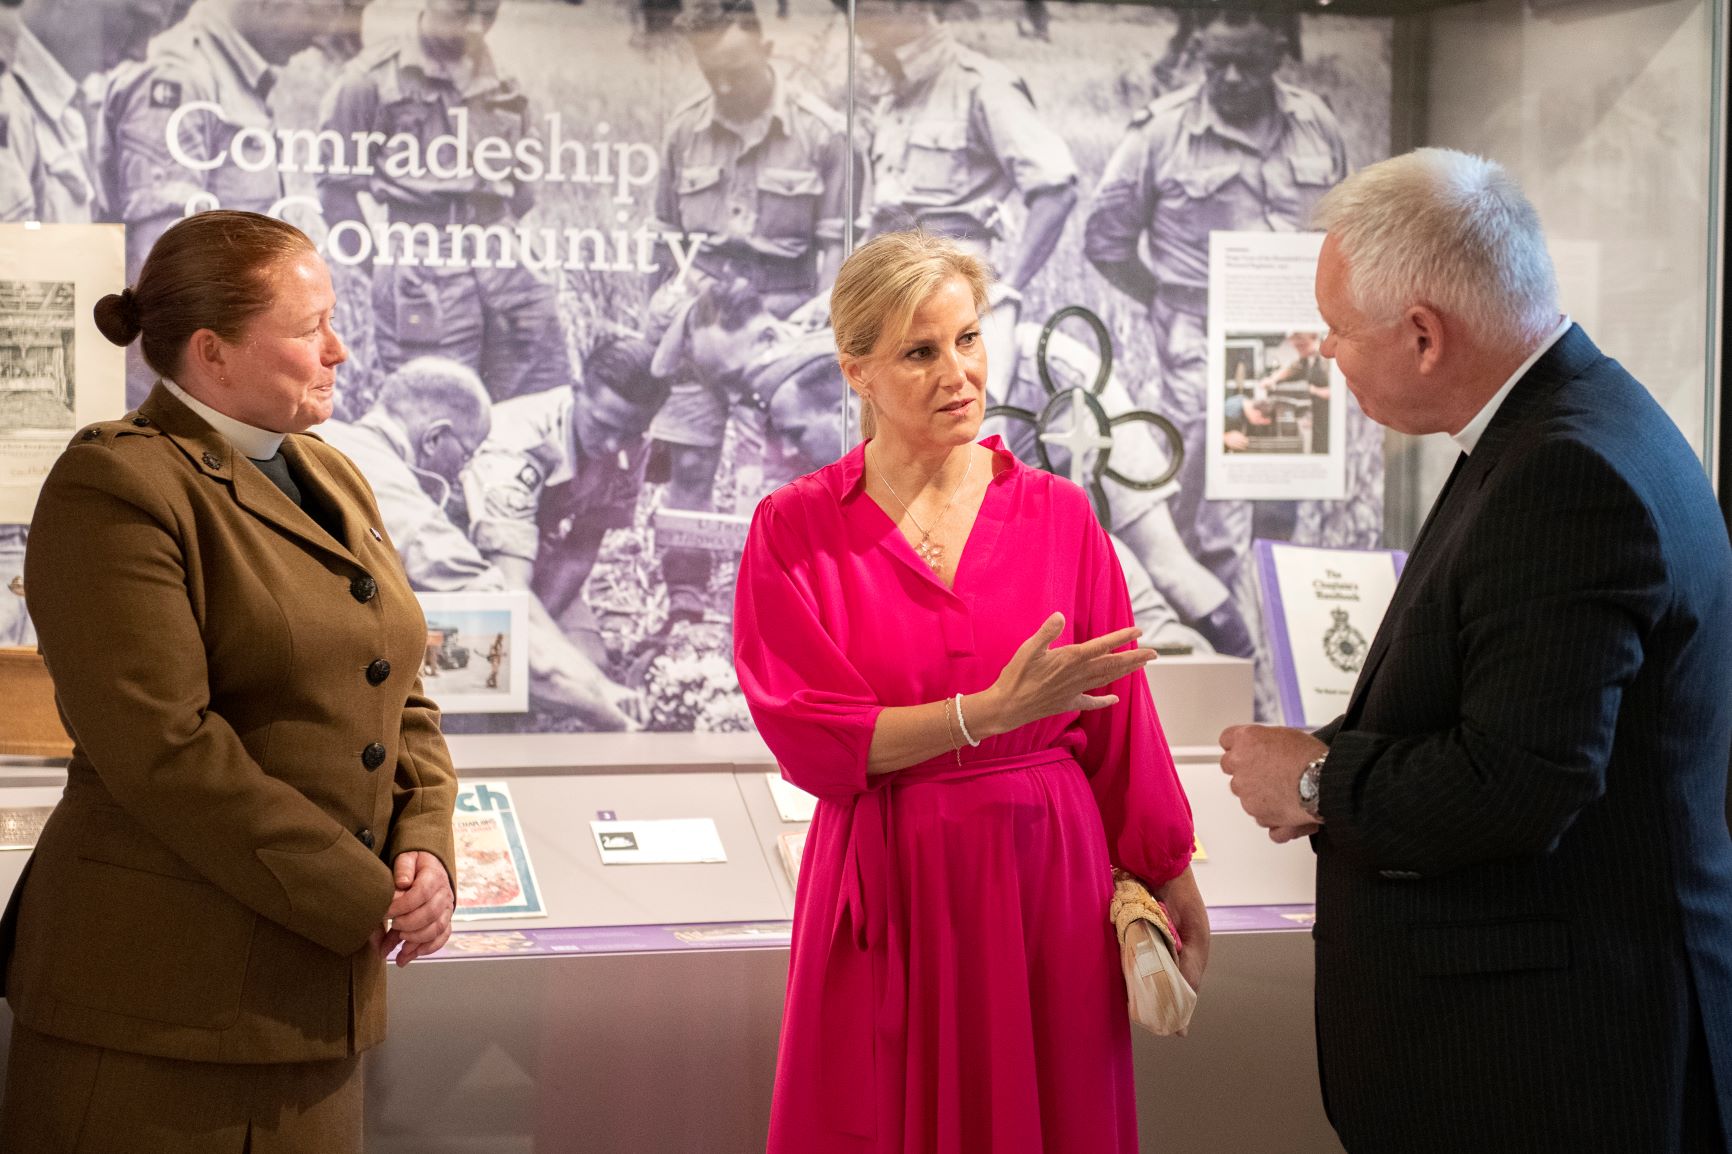 HRH The Countess of Wessex talking to Revd Totten and an Army chaplain